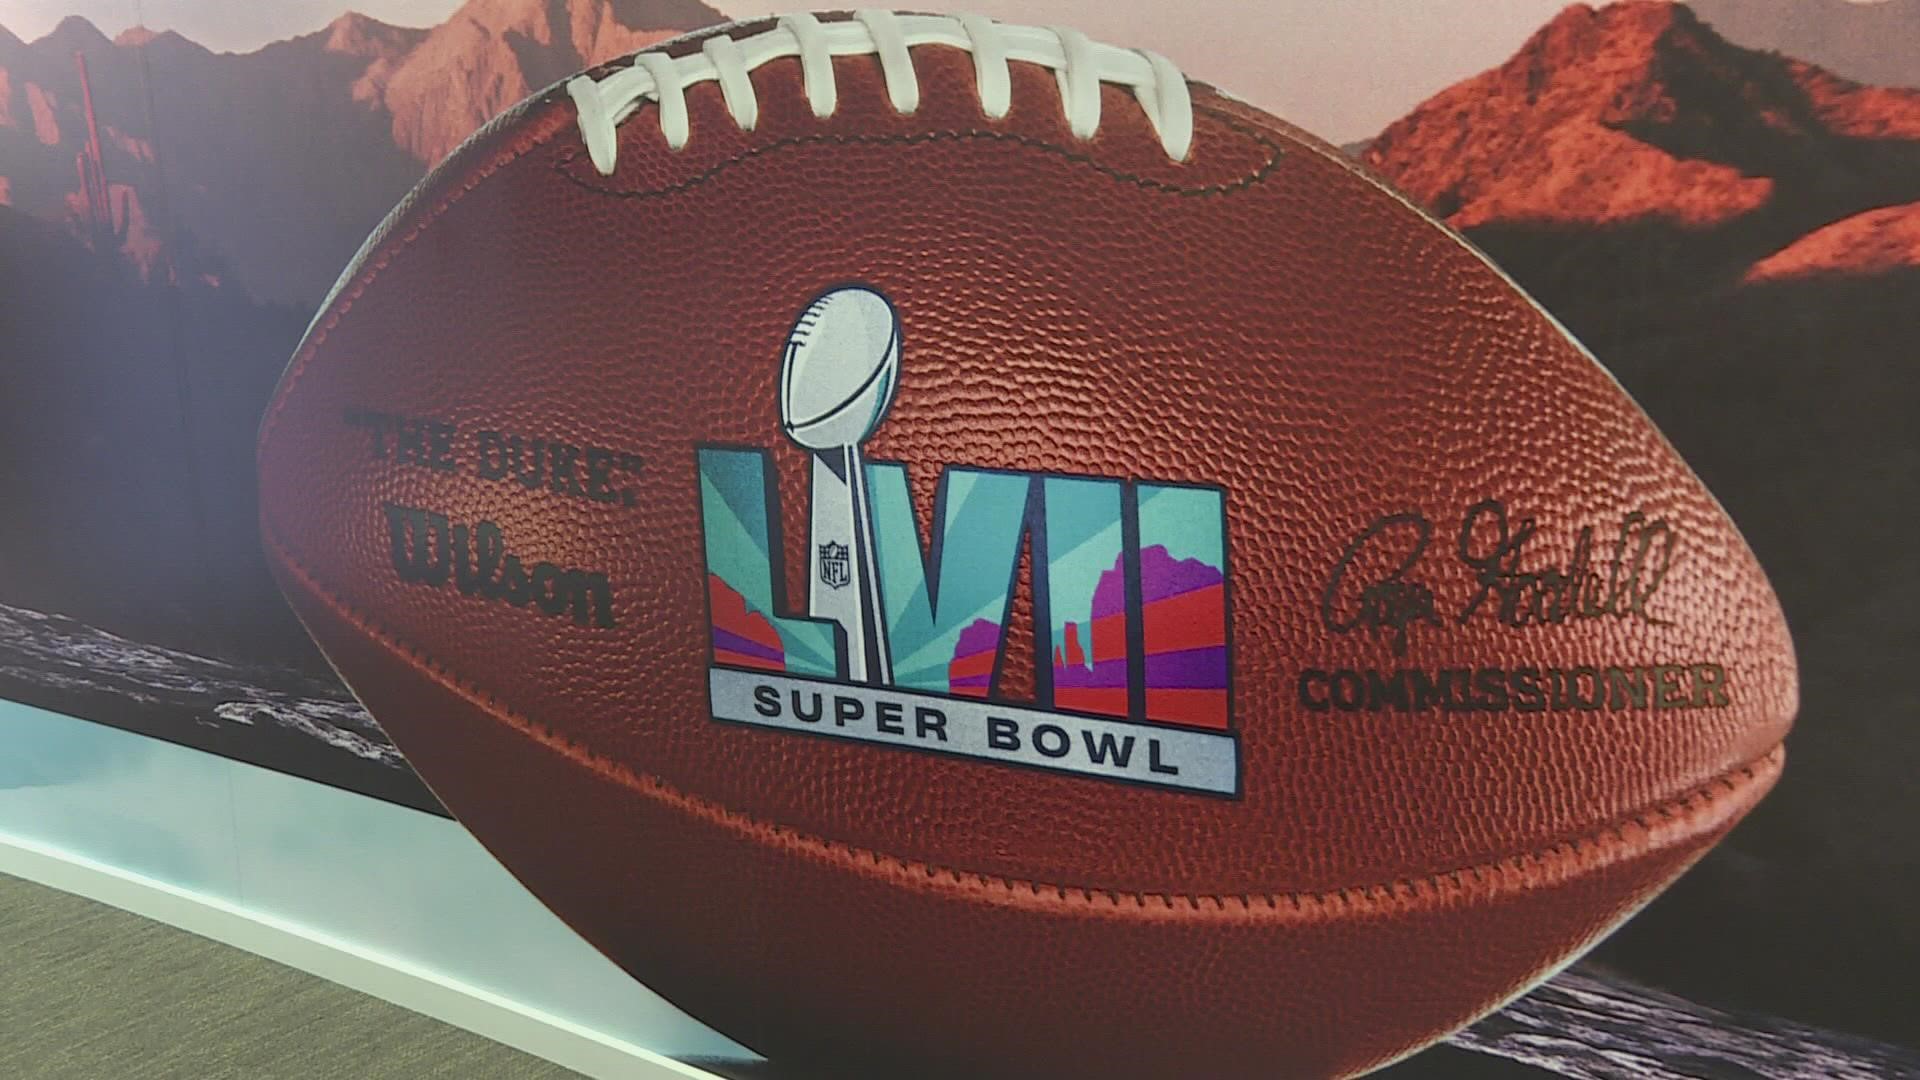 Valley businesses expected to see boost with coming Super Bowlnews.com